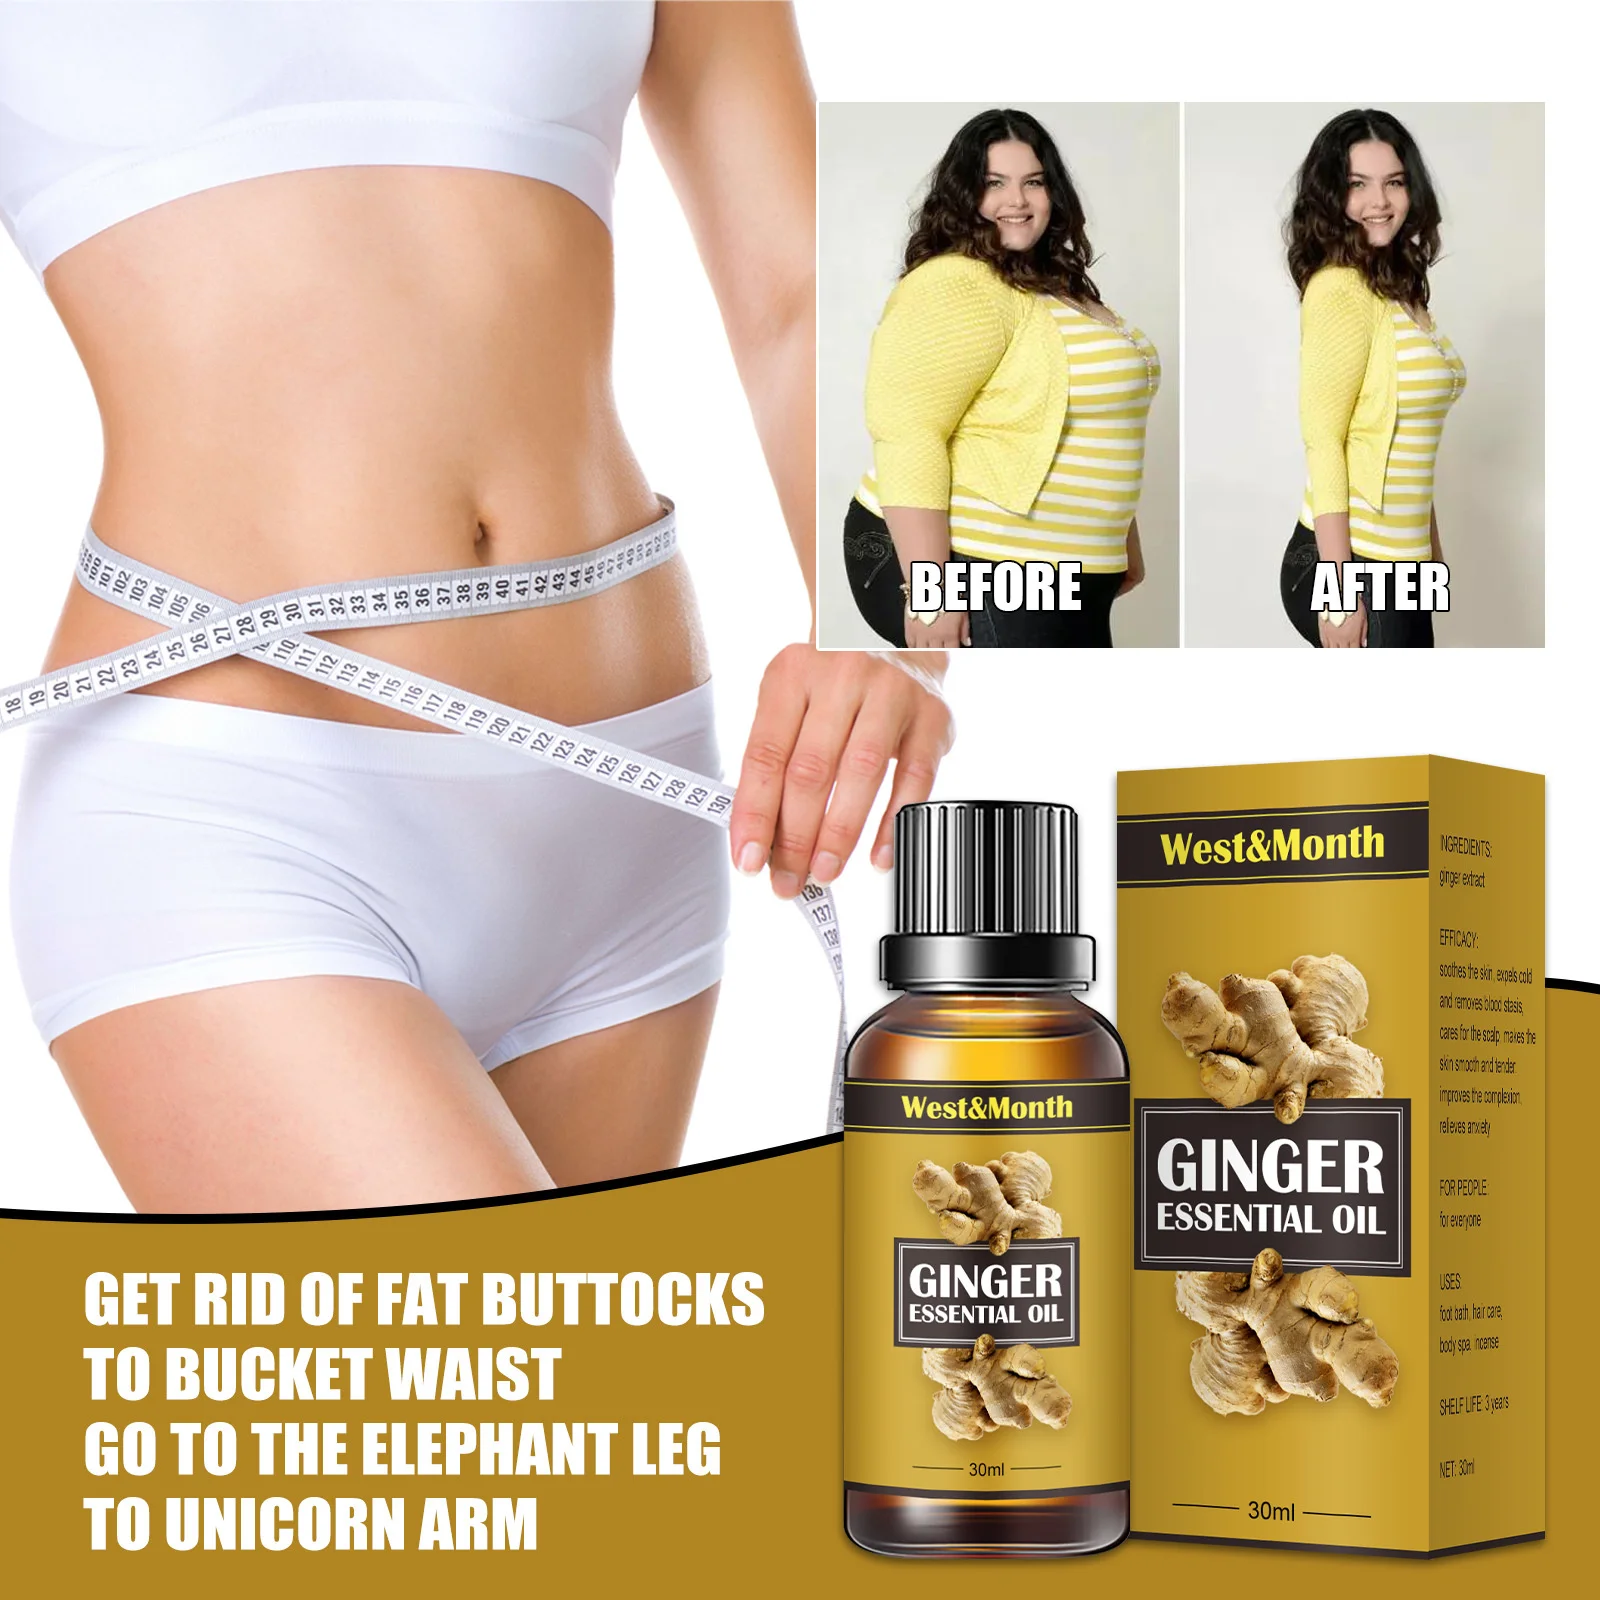 

Ginger Slimming Essential Oils Lose Weight Fast Fat Burning Firming Waist Abdomen Leg Remove Cellulite Massage Shaping Body Care